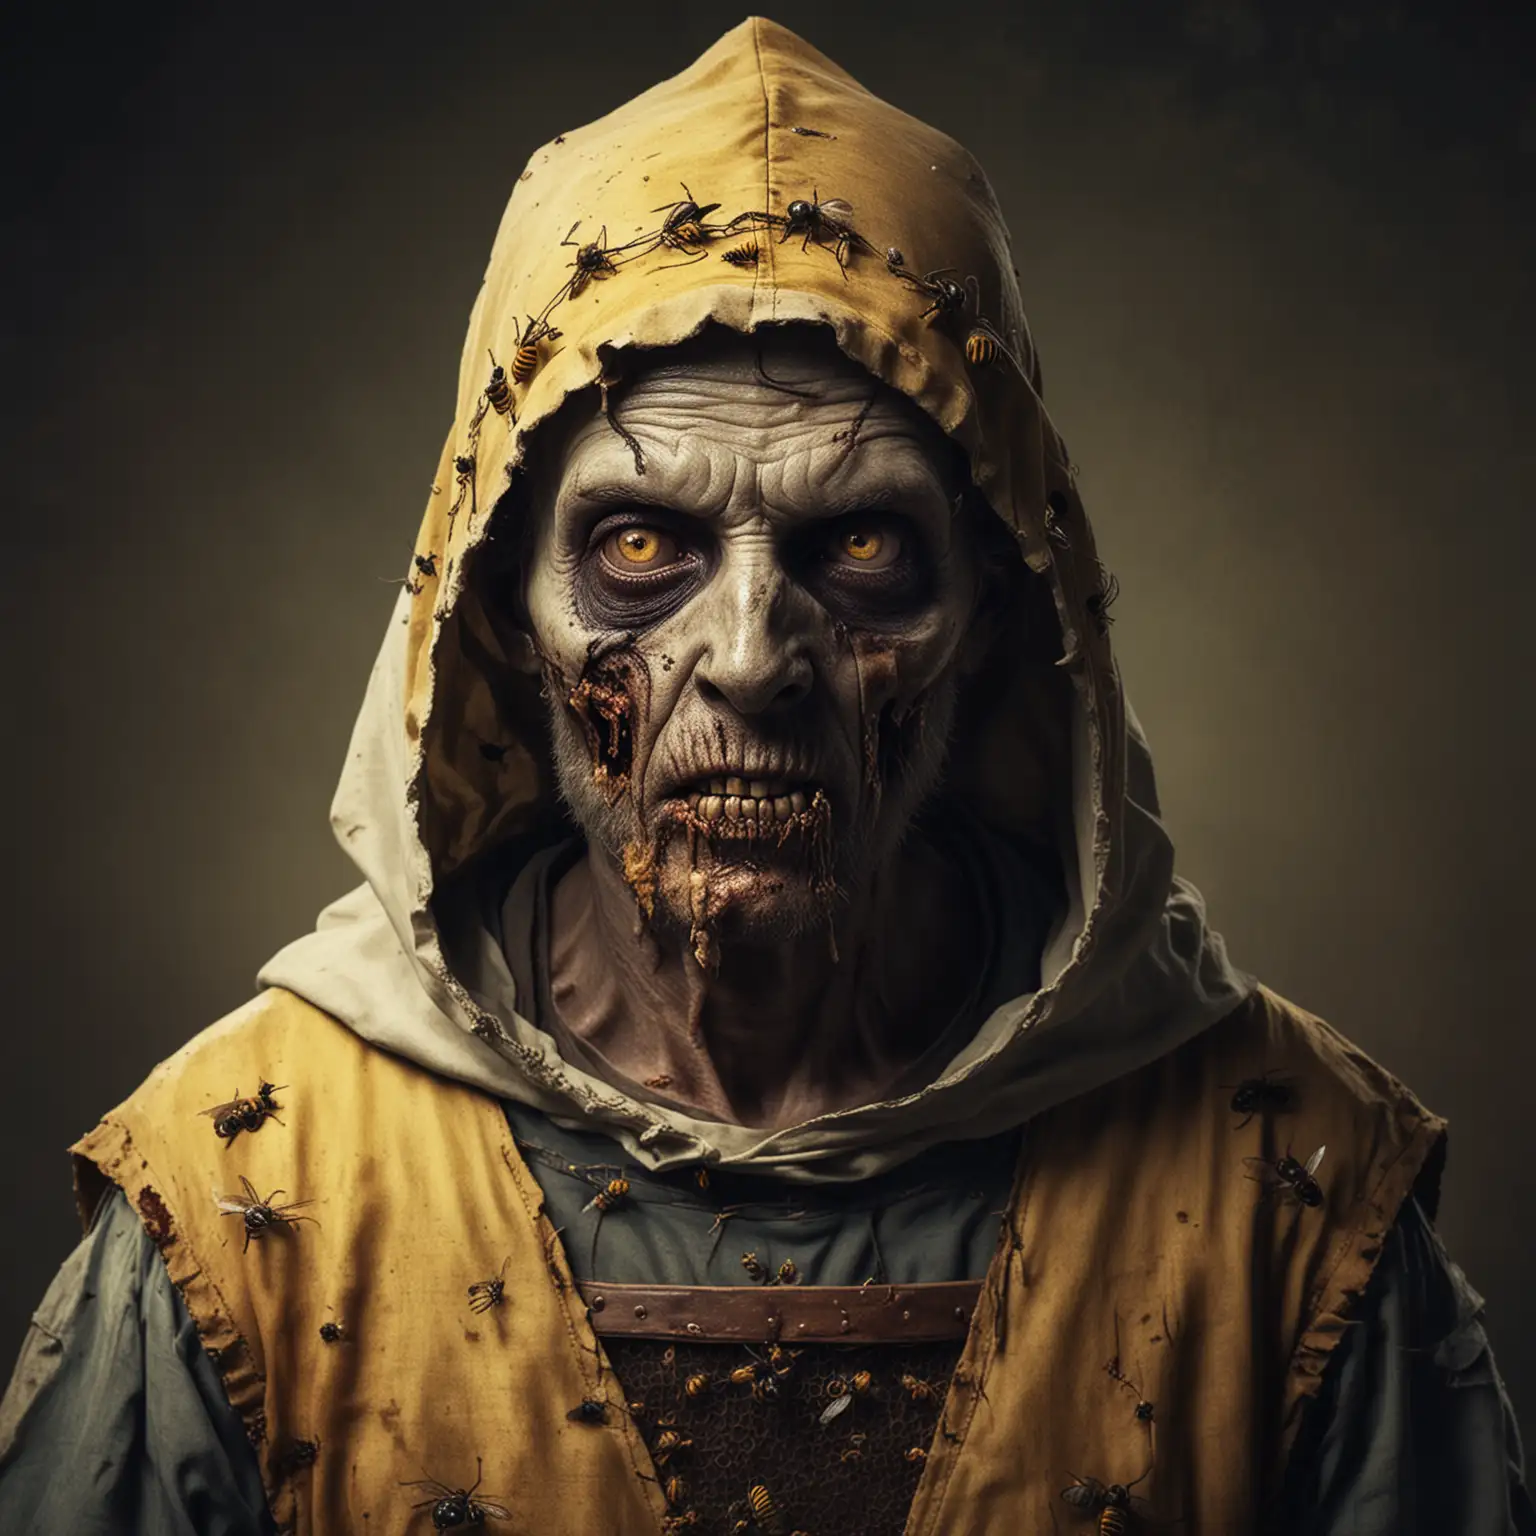 Medieval Beekeeper Zombie Portrait Creepy Undead Character with Beekeeping Attire